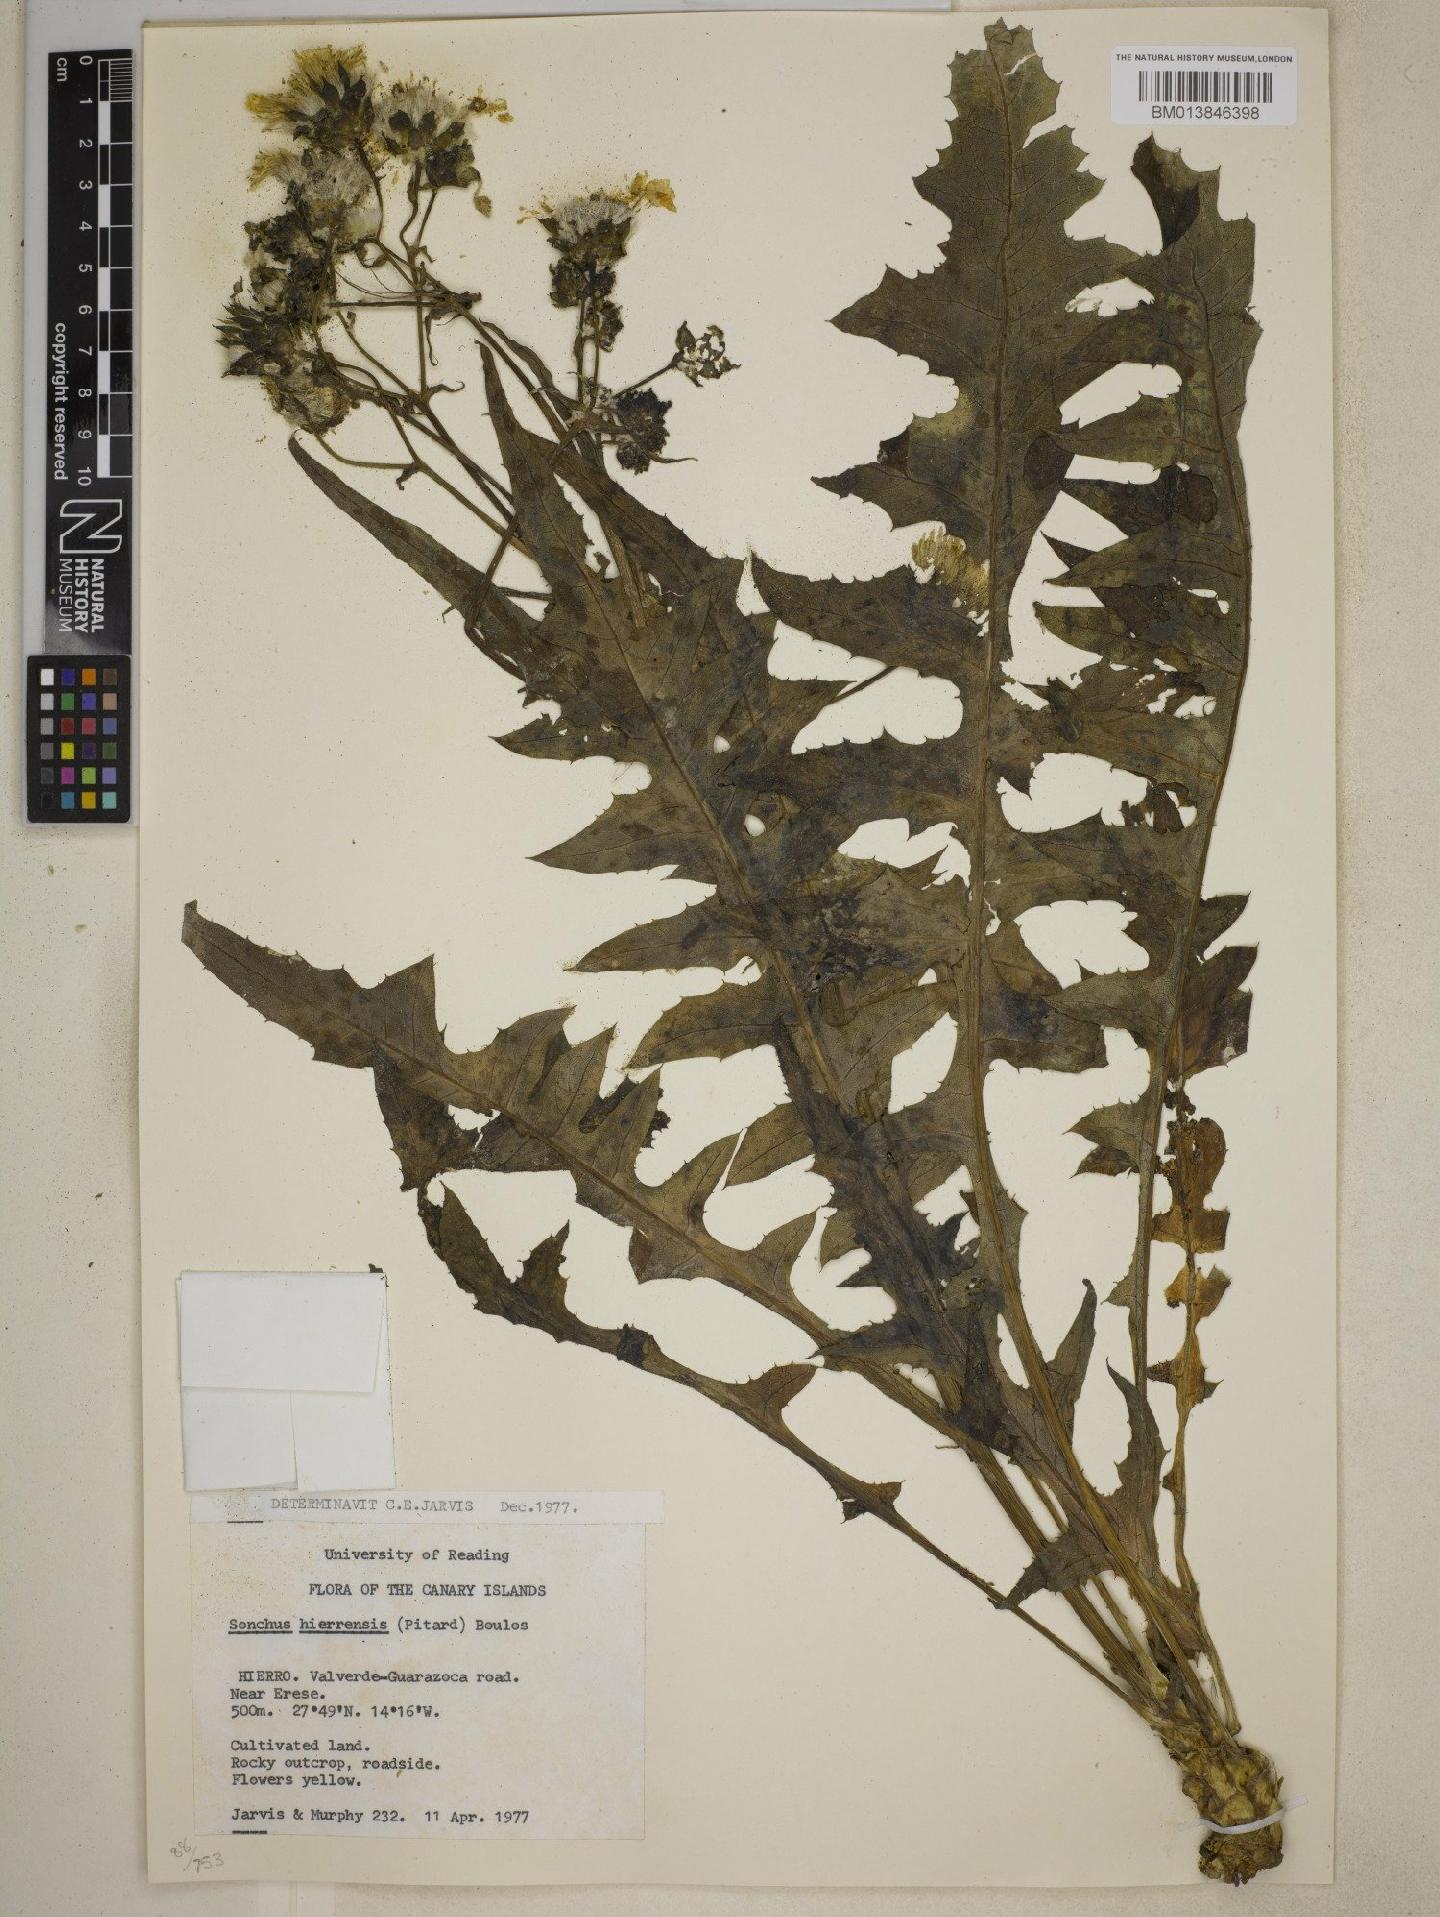 To NHMUK collection (Sonchus hierrensis (Pit.) Boulos; NHMUK:ecatalogue:9075092)